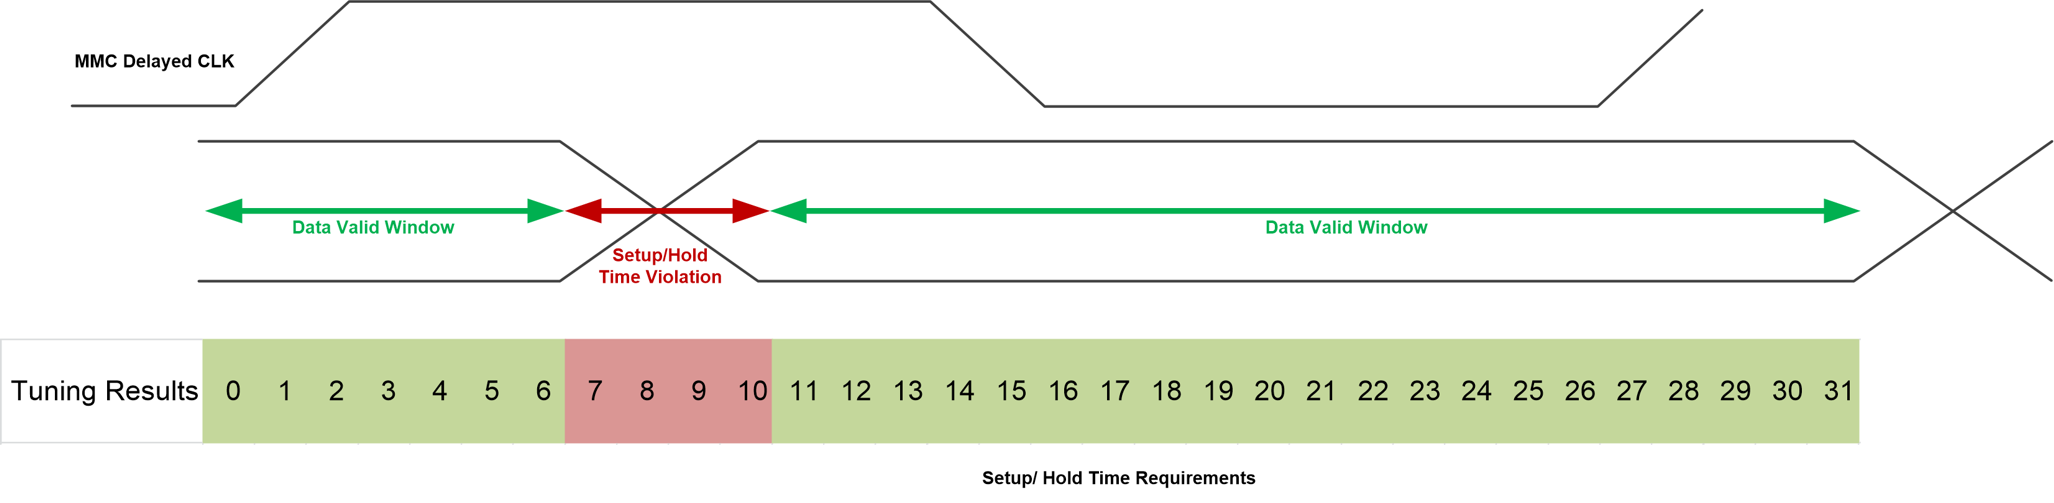  Setup Hold Time
                Requirements